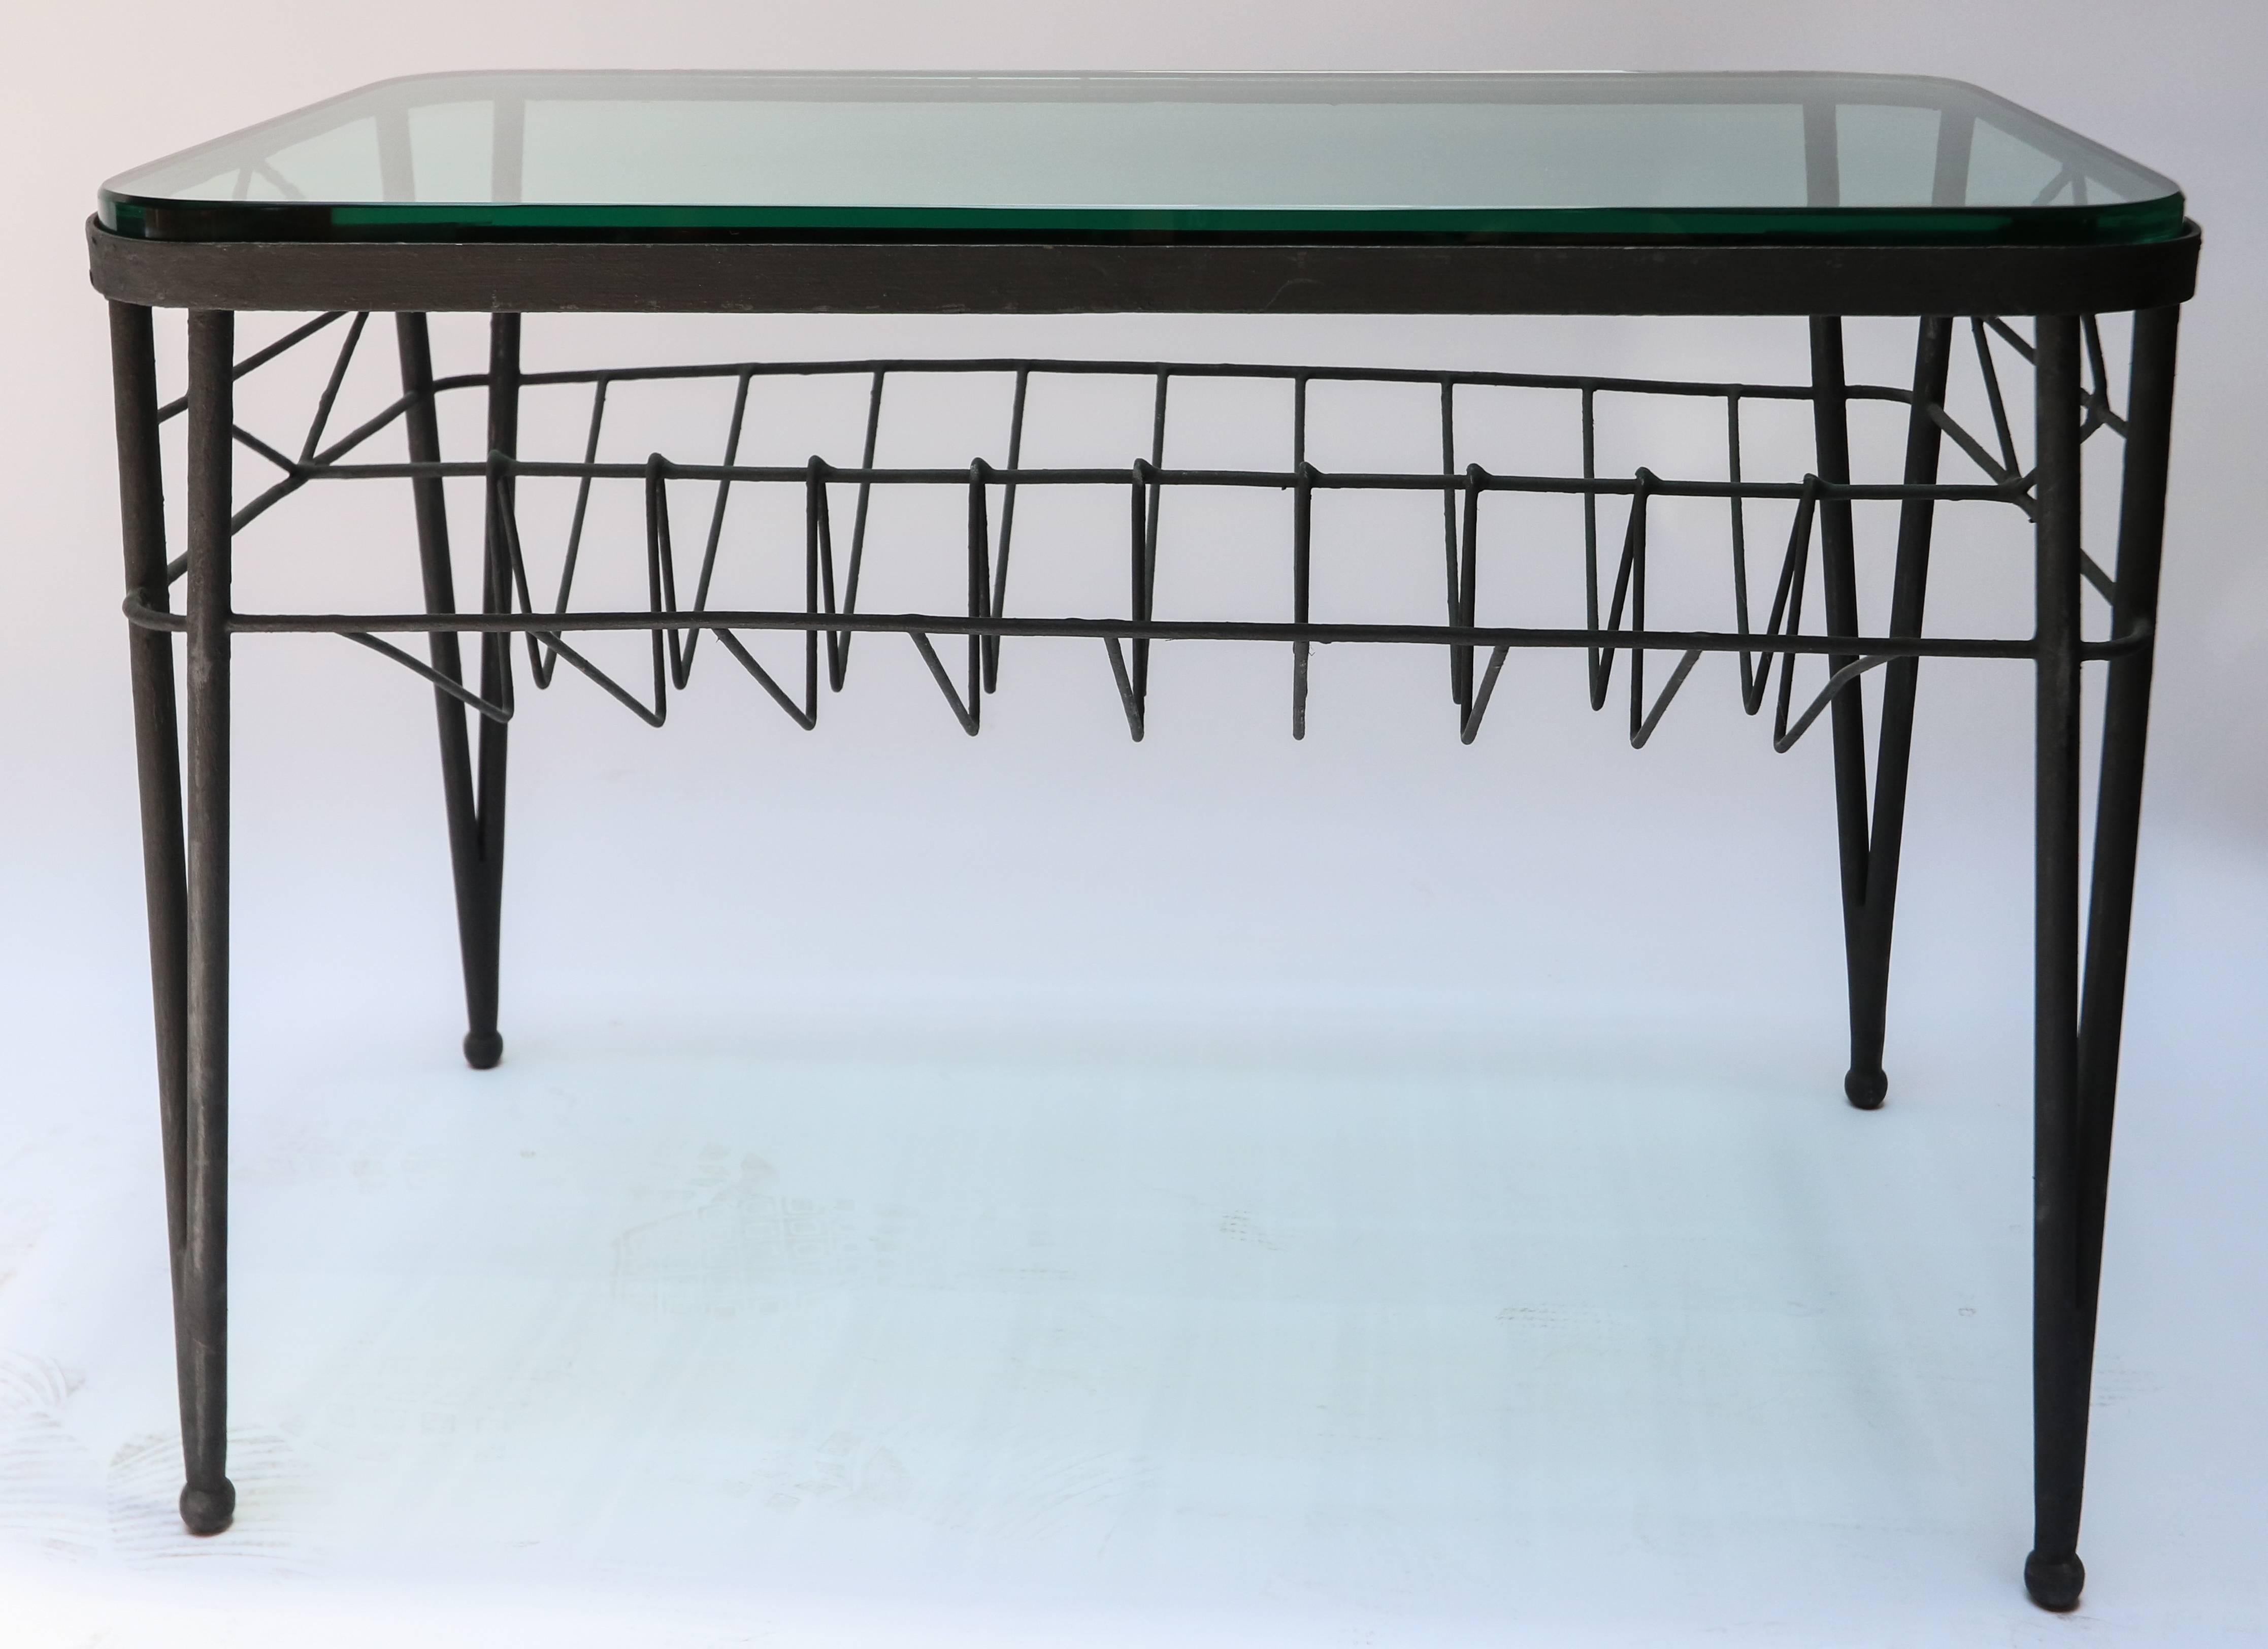 1960s Italian Rectangular Black Metal Side Table with Glass Top In Good Condition For Sale In Los Angeles, CA